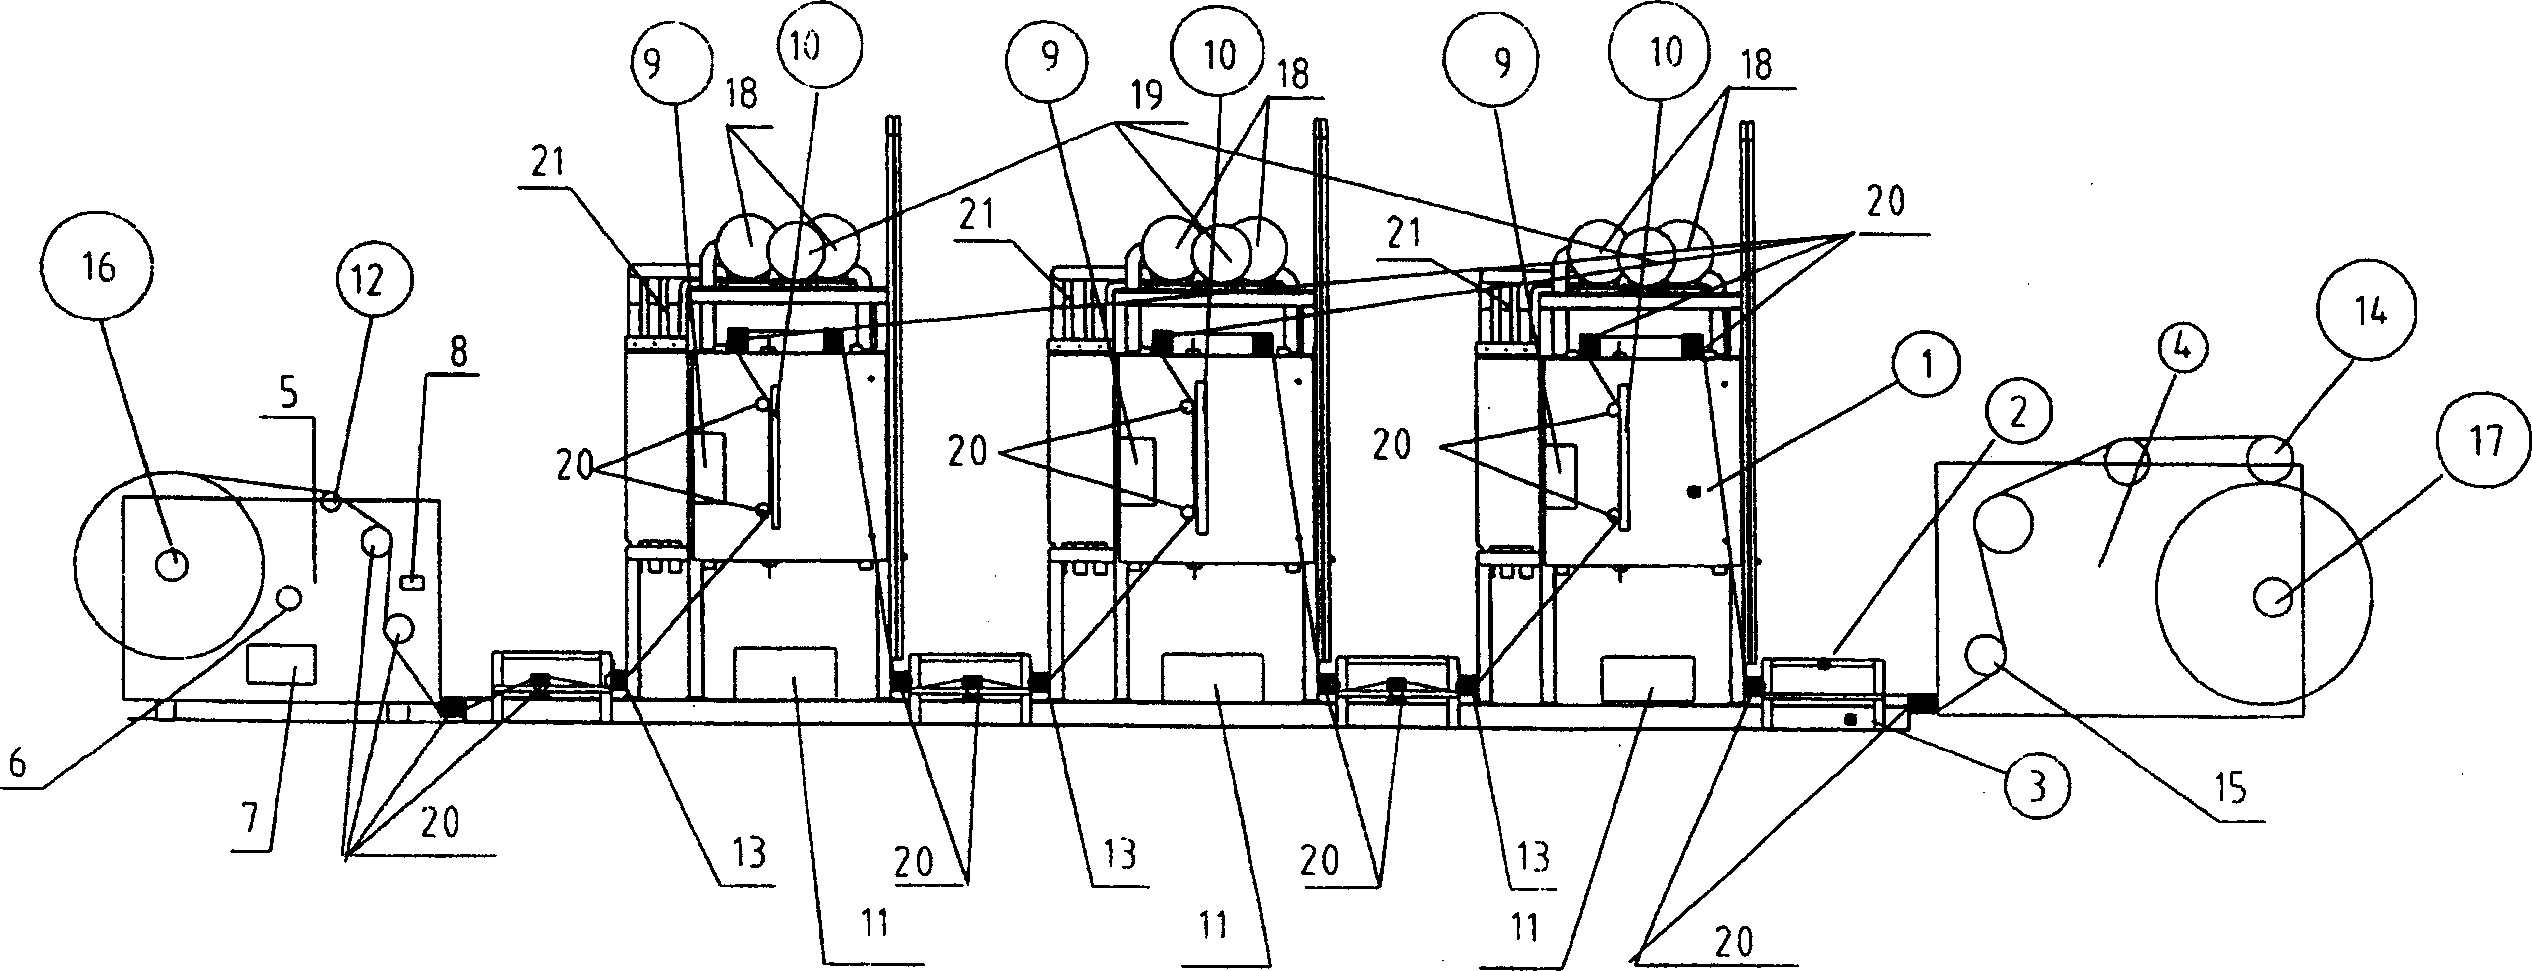 Multiple-unit drilling apparatus for wide breadth thin type base material